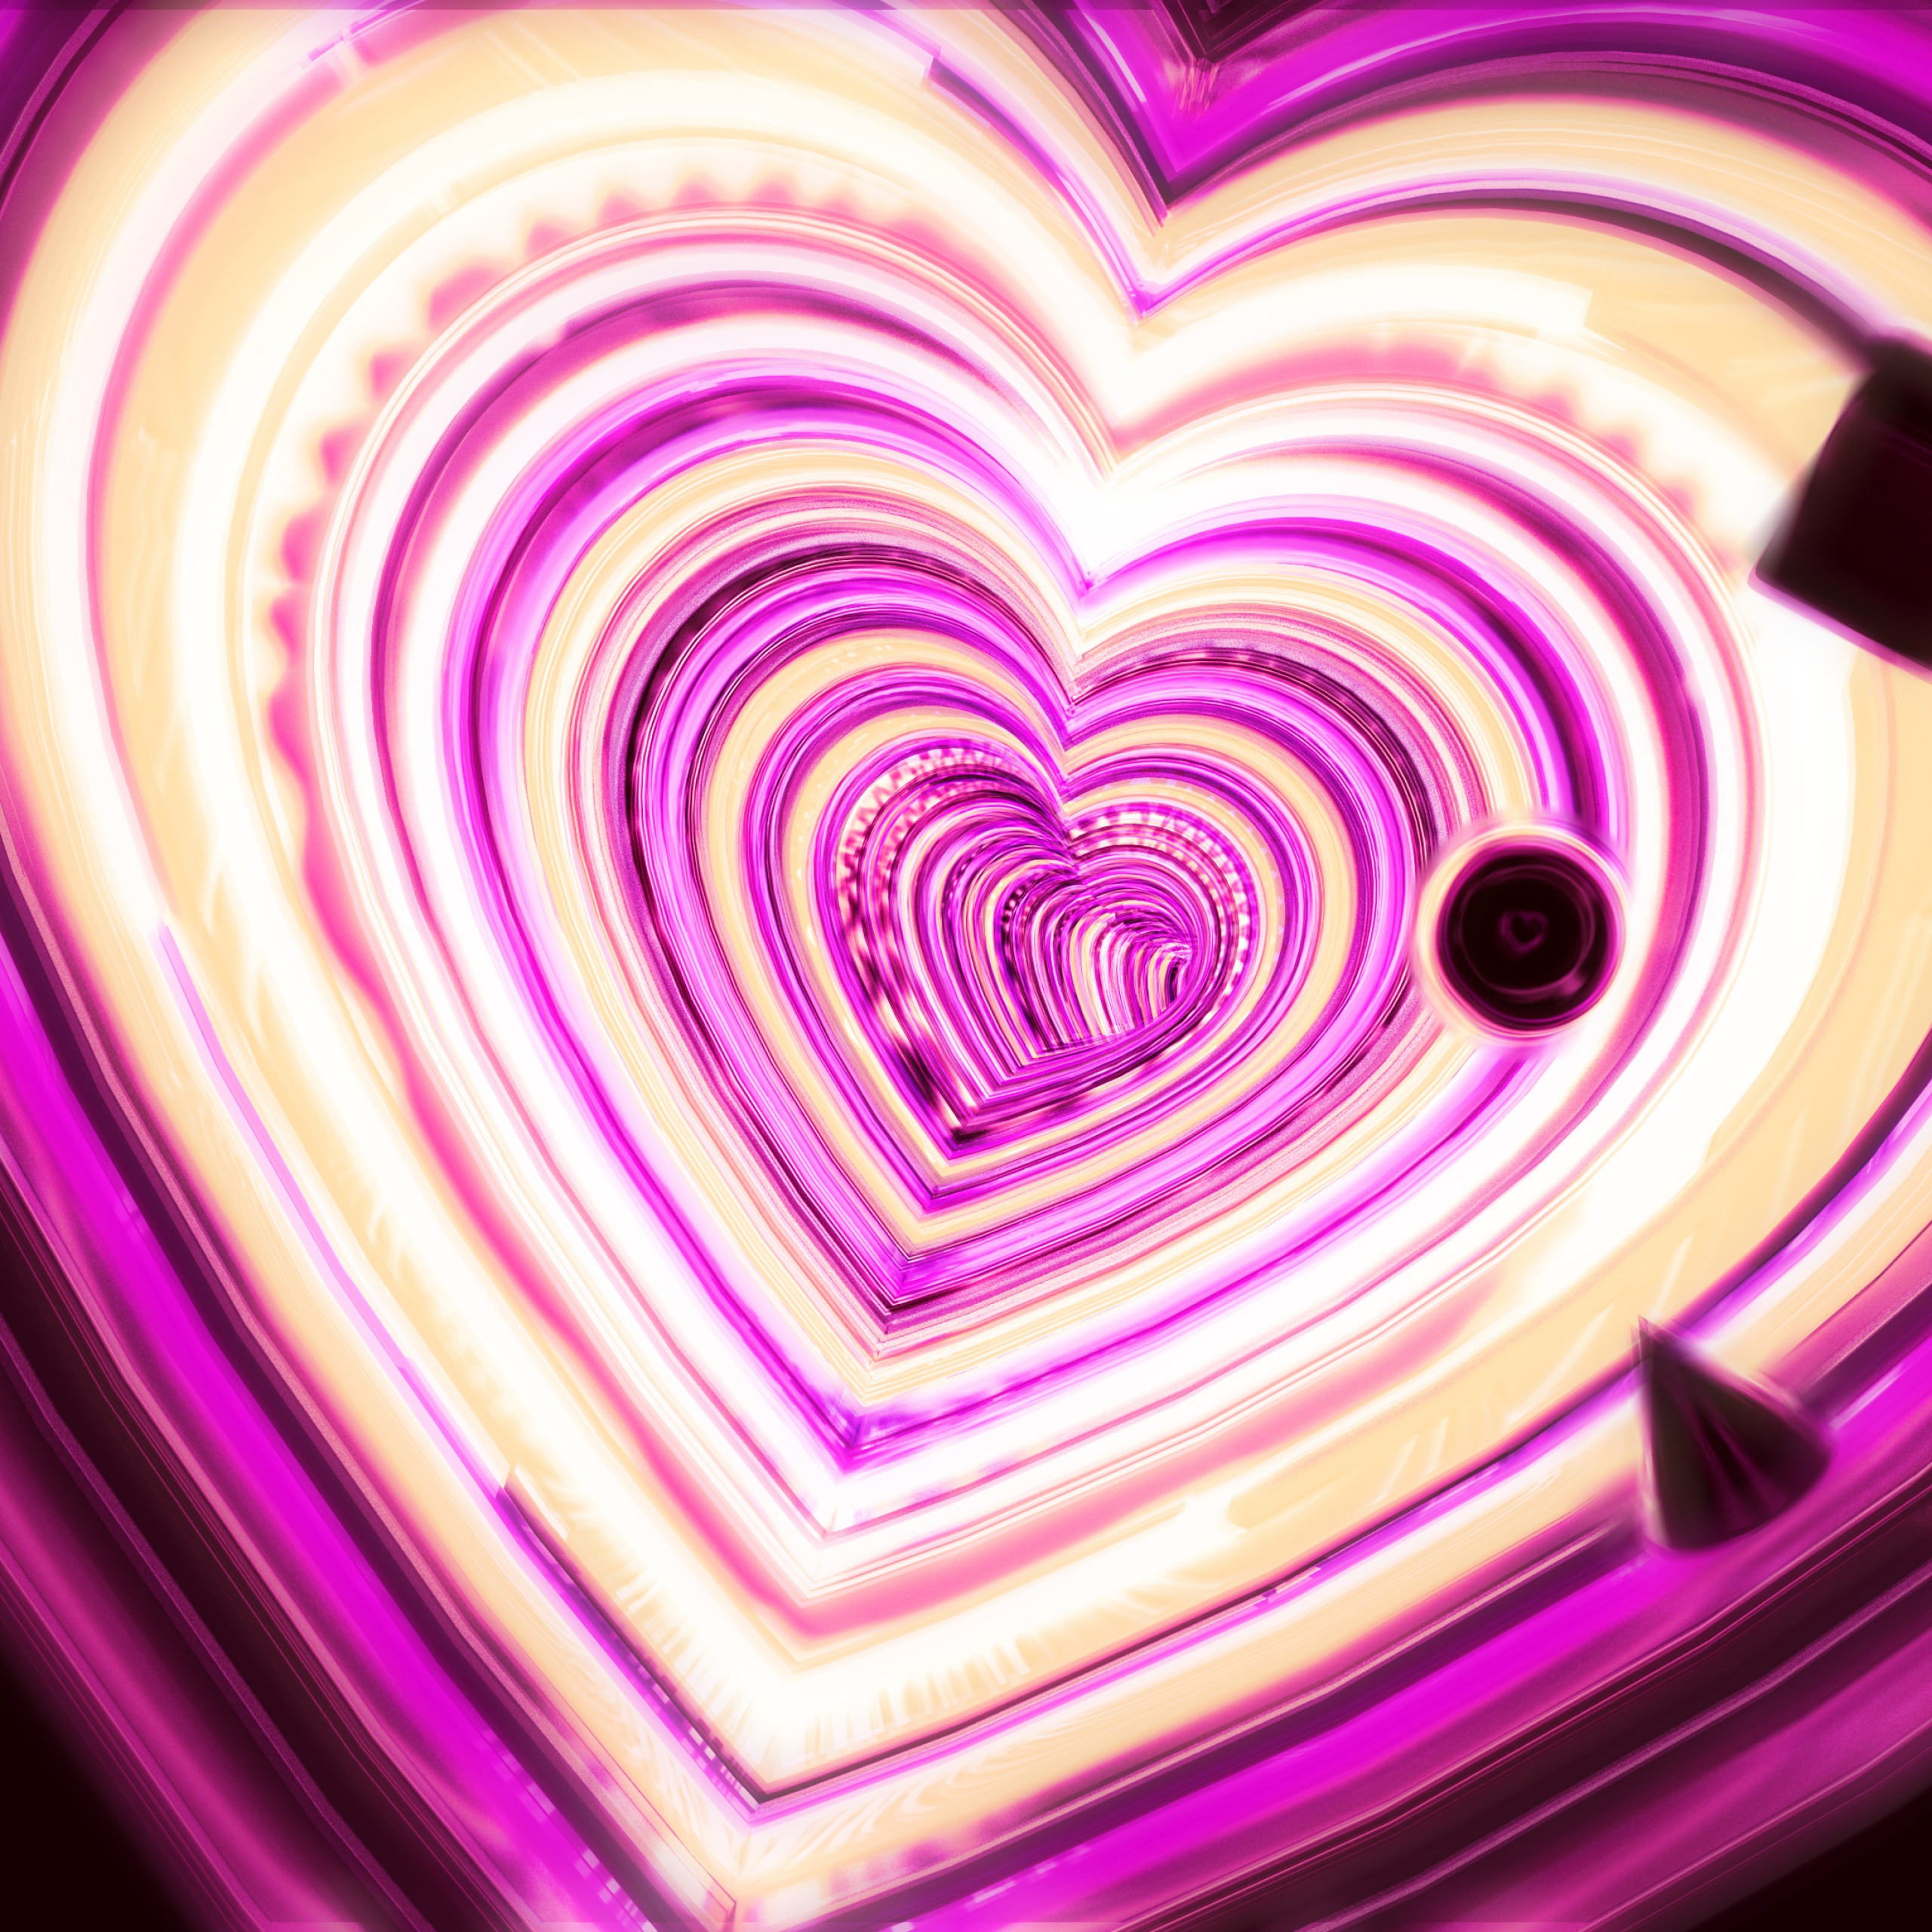 Two Pink Heart Illustration on Pink Background  Free Stock Photo